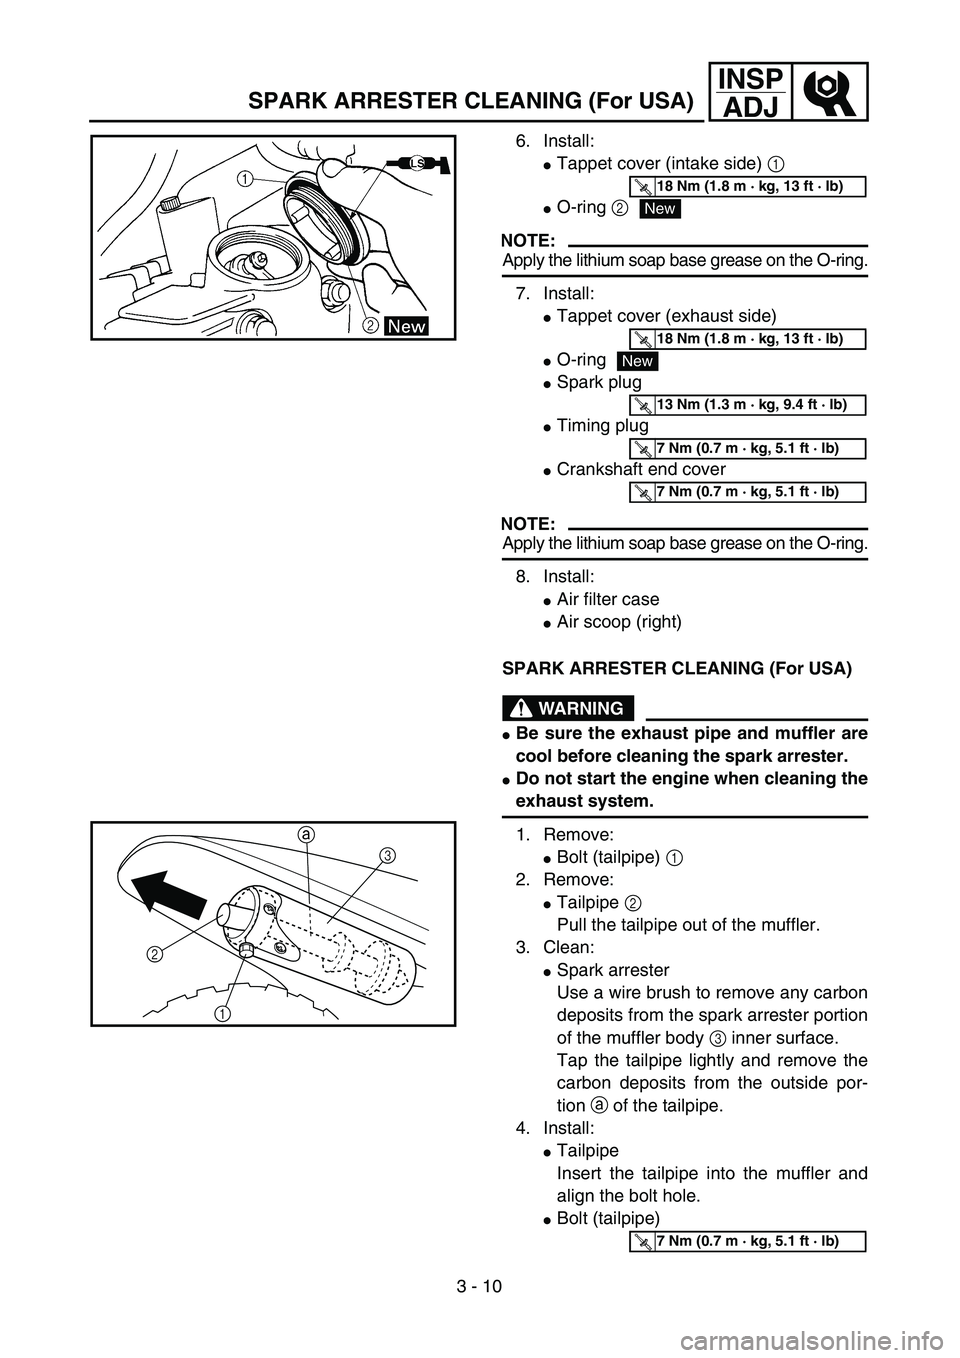 YAMAHA TTR90 2005  Owners Manual 3 - 10
INSP
ADJ
SPARK ARRESTER CLEANING (For USA)
6. Install:
Tappet cover (intake side) 1 
O-ring 2
NOTE:
Apply the lithium soap base grease on the O-ring.
7. Install:
Tappet cover (exhaust side)
